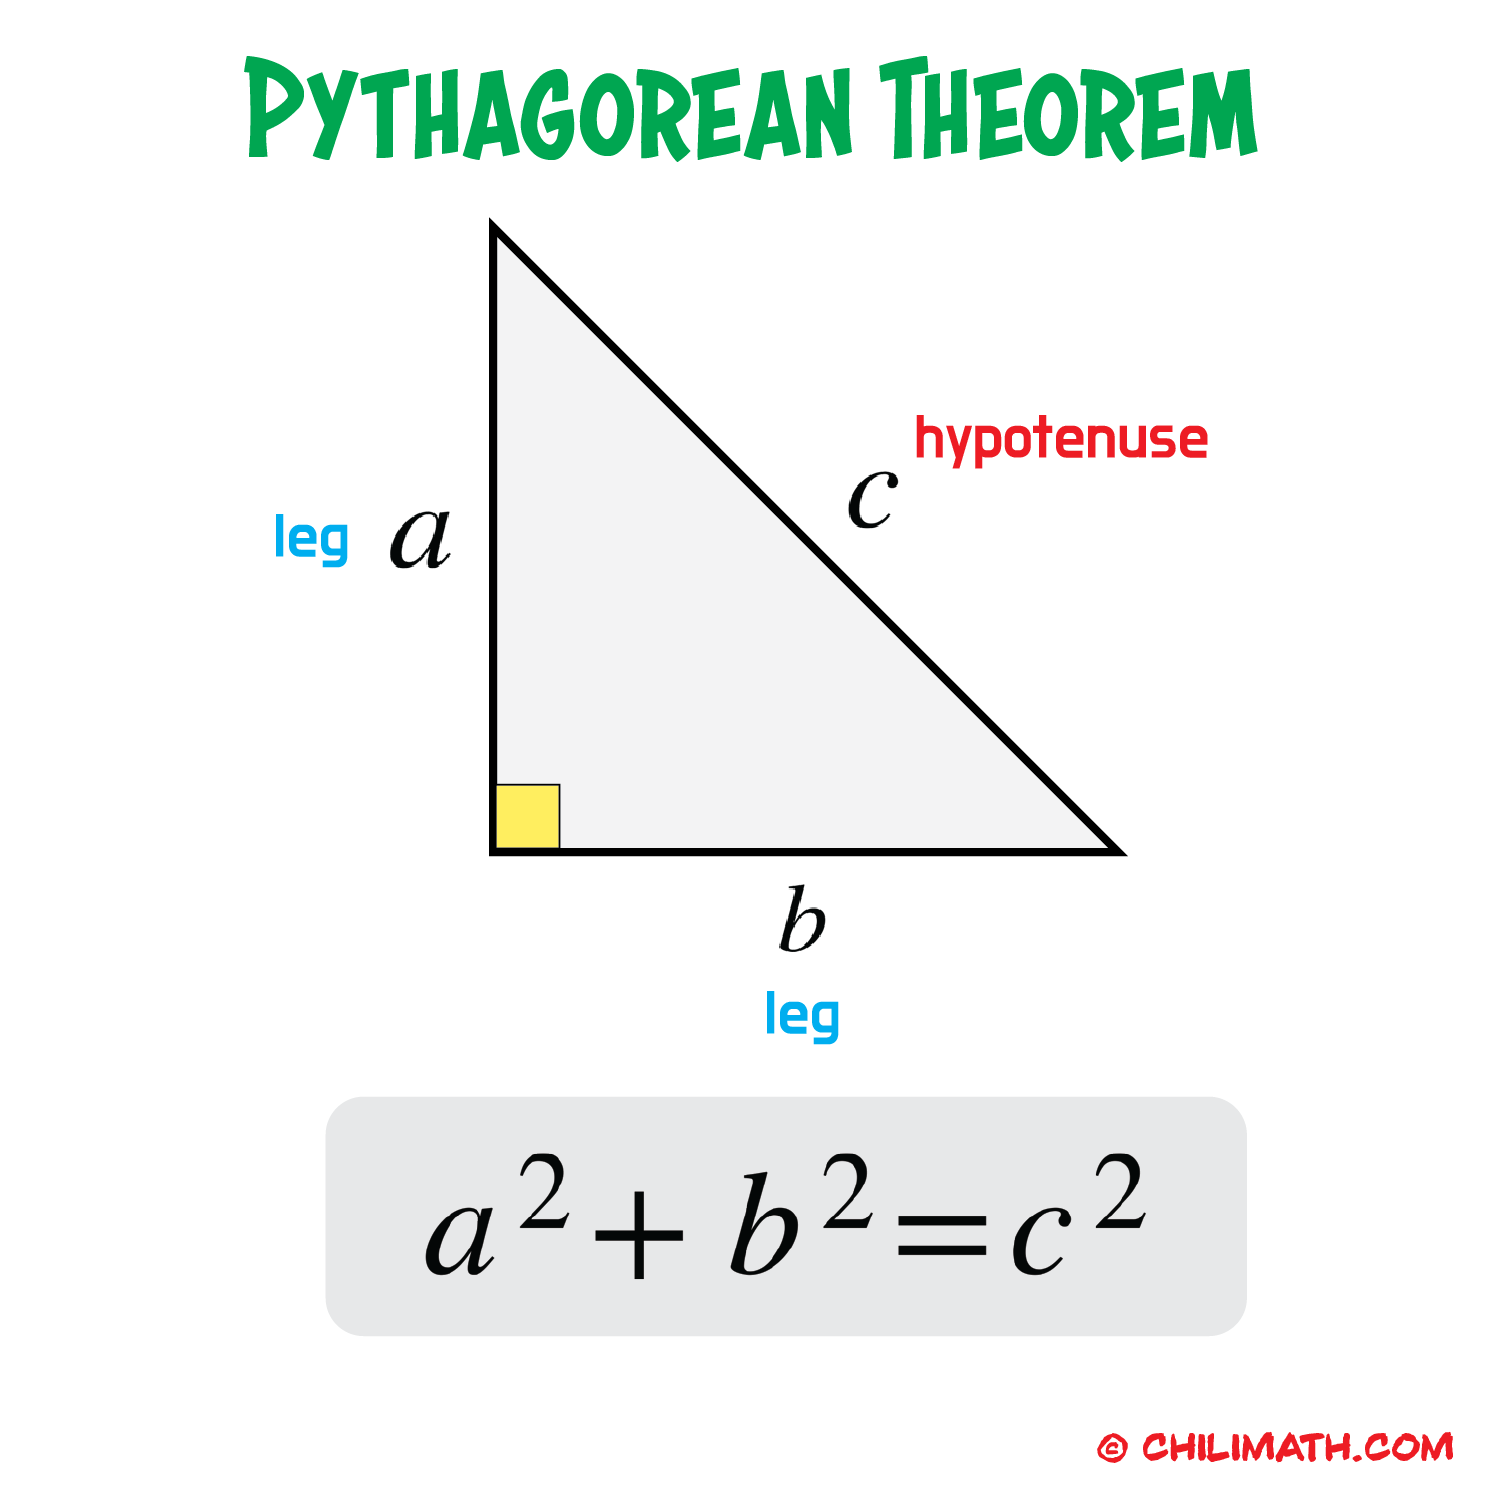 cutting the square along the diagonal and showing that the pythagorean theorem applies